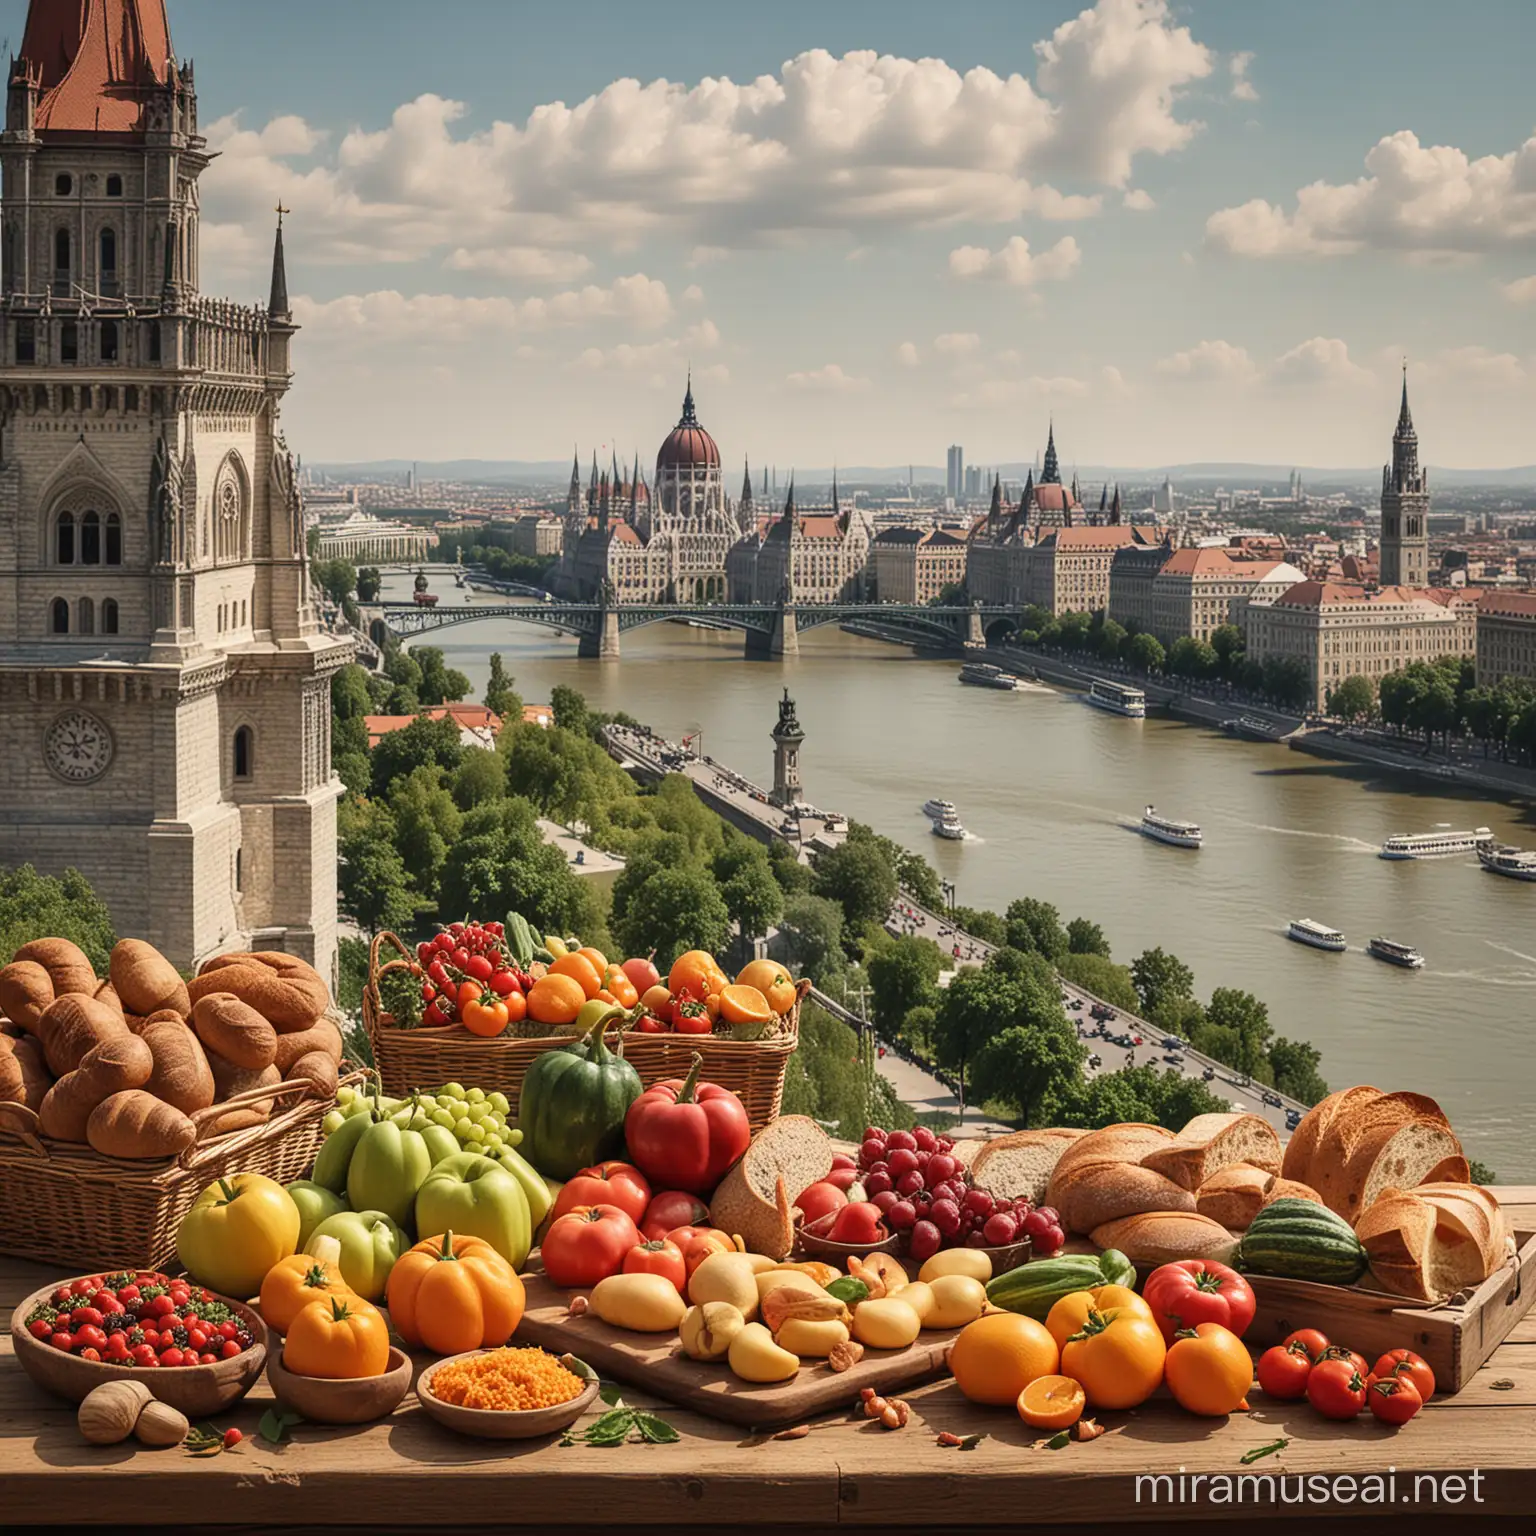 The main image captures the essence of Hungarian cuisine and freshness, showing a cornucopia of fresh fruits, vegetables, traditional Hungarian ingredients like paprika, and artisan bread, all spread out on a rustic wooden table. The background subtly features iconic Hungarian landmarks (like the Parliament building and the Chain Bridge) fading into the distance, symbolizing FreshWagon's nationwide reach.